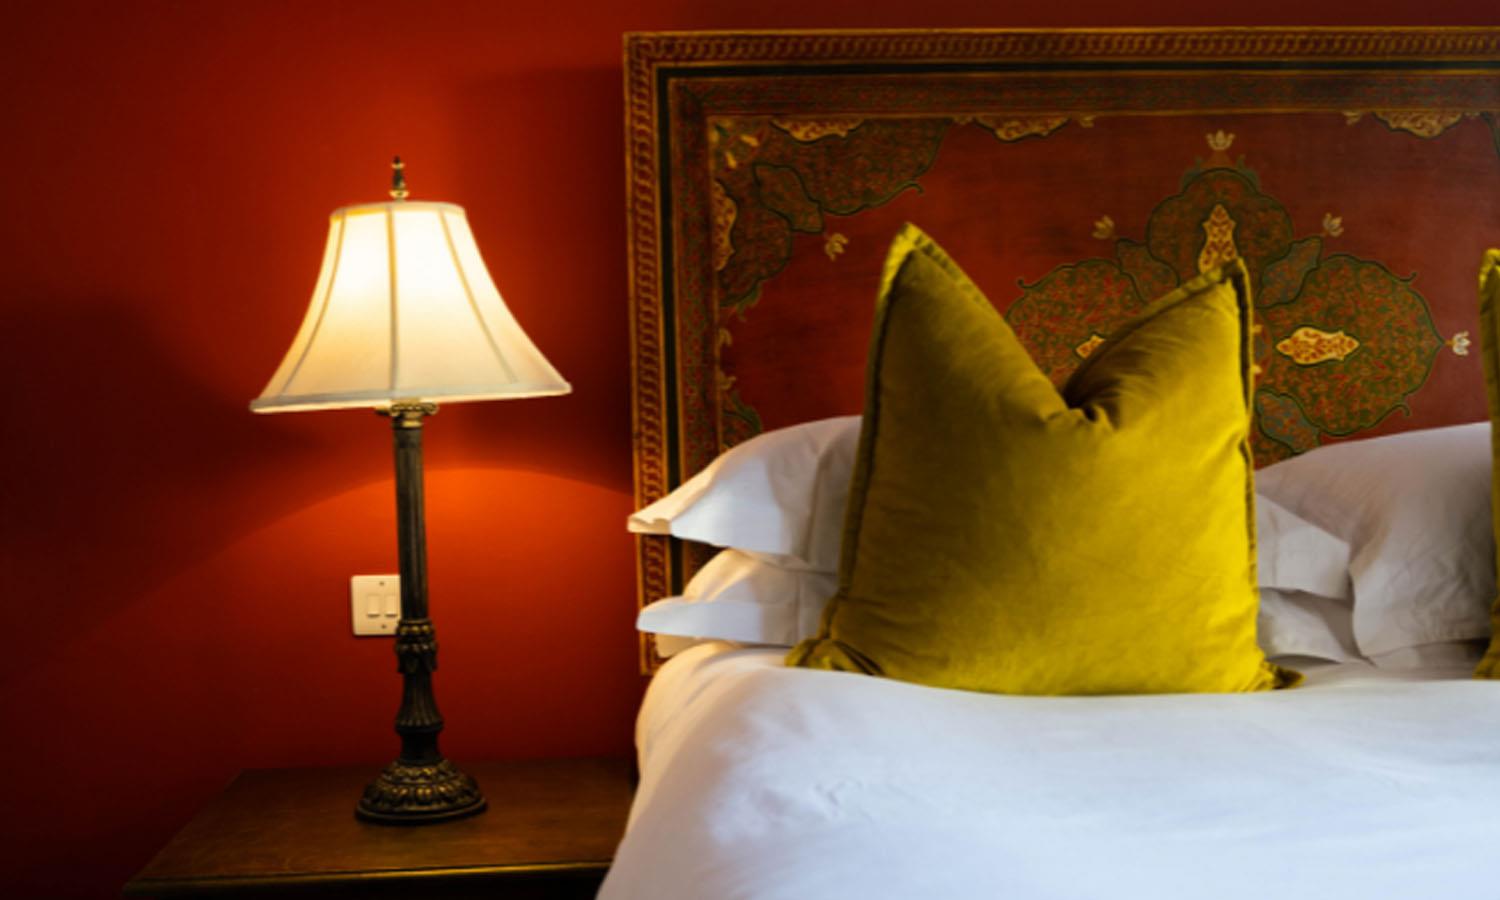 All our rooms are tastefully decorated and designed for relaxation